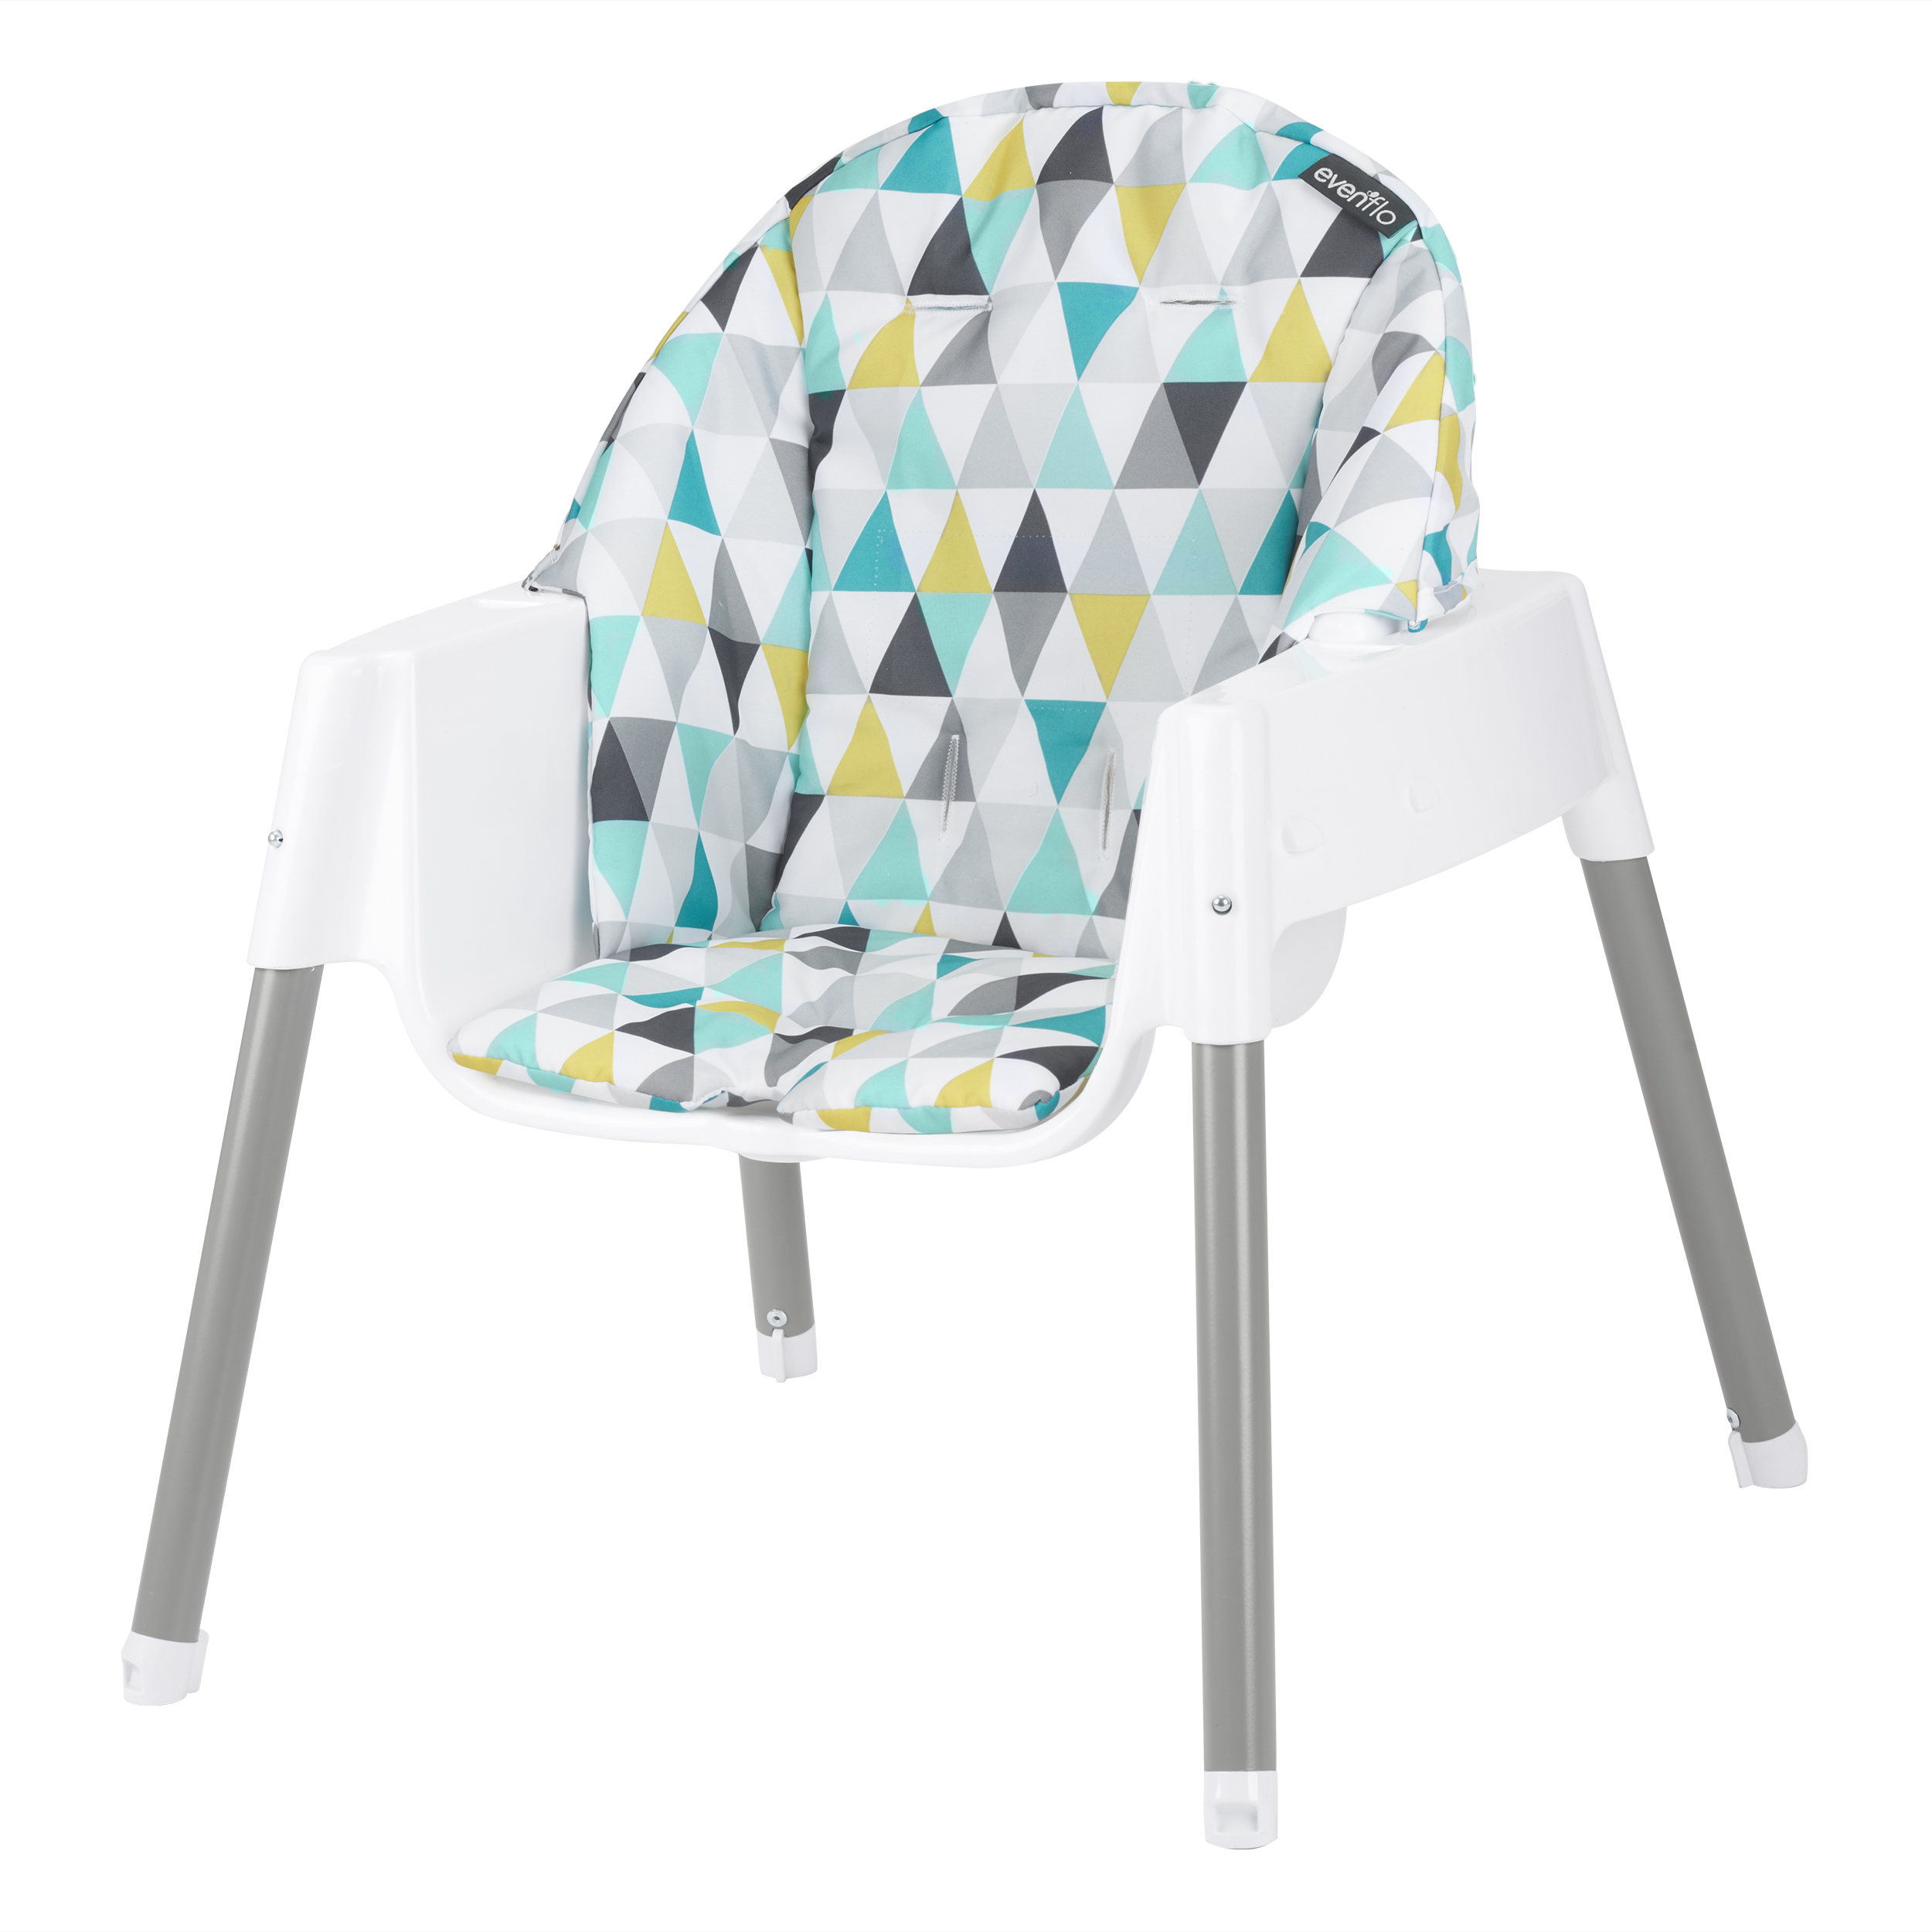 Evenflo-4-in-1-Eat-Grow-Convertible-High-Chair-Prism-Triangles 2